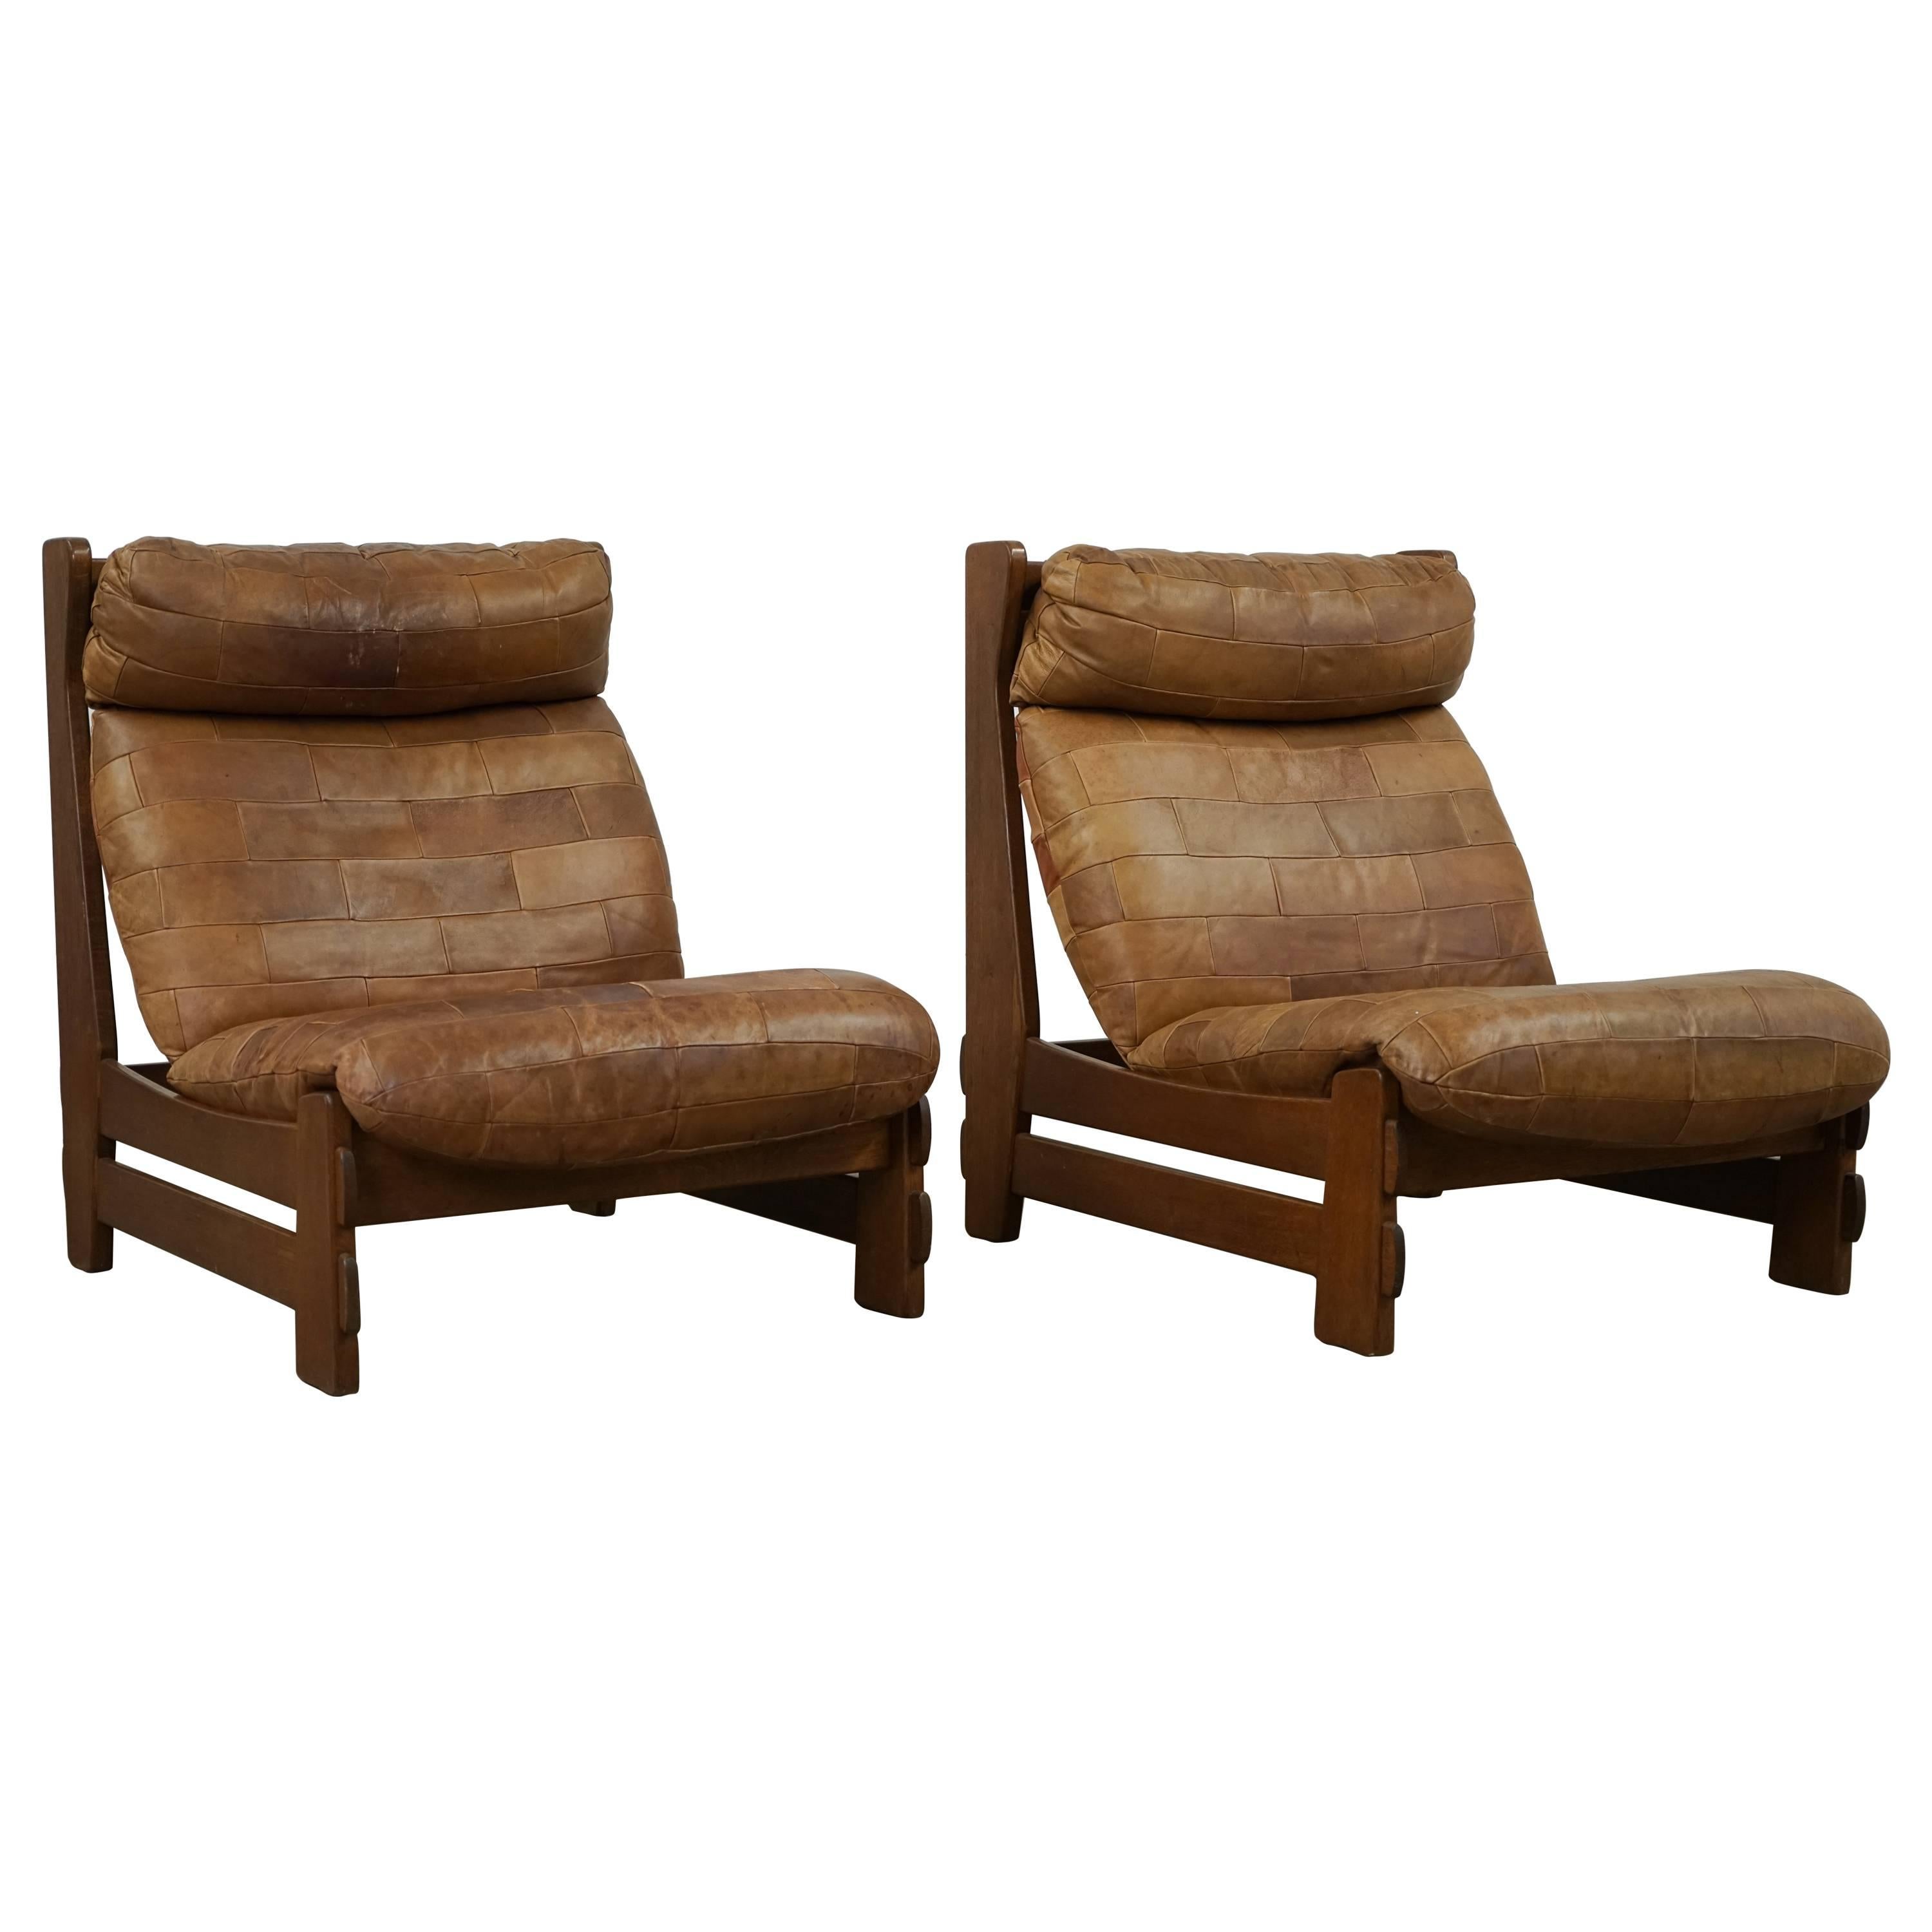 Pair of 1970s De Sede Patchwork Leather and Oak Sipper Chairs